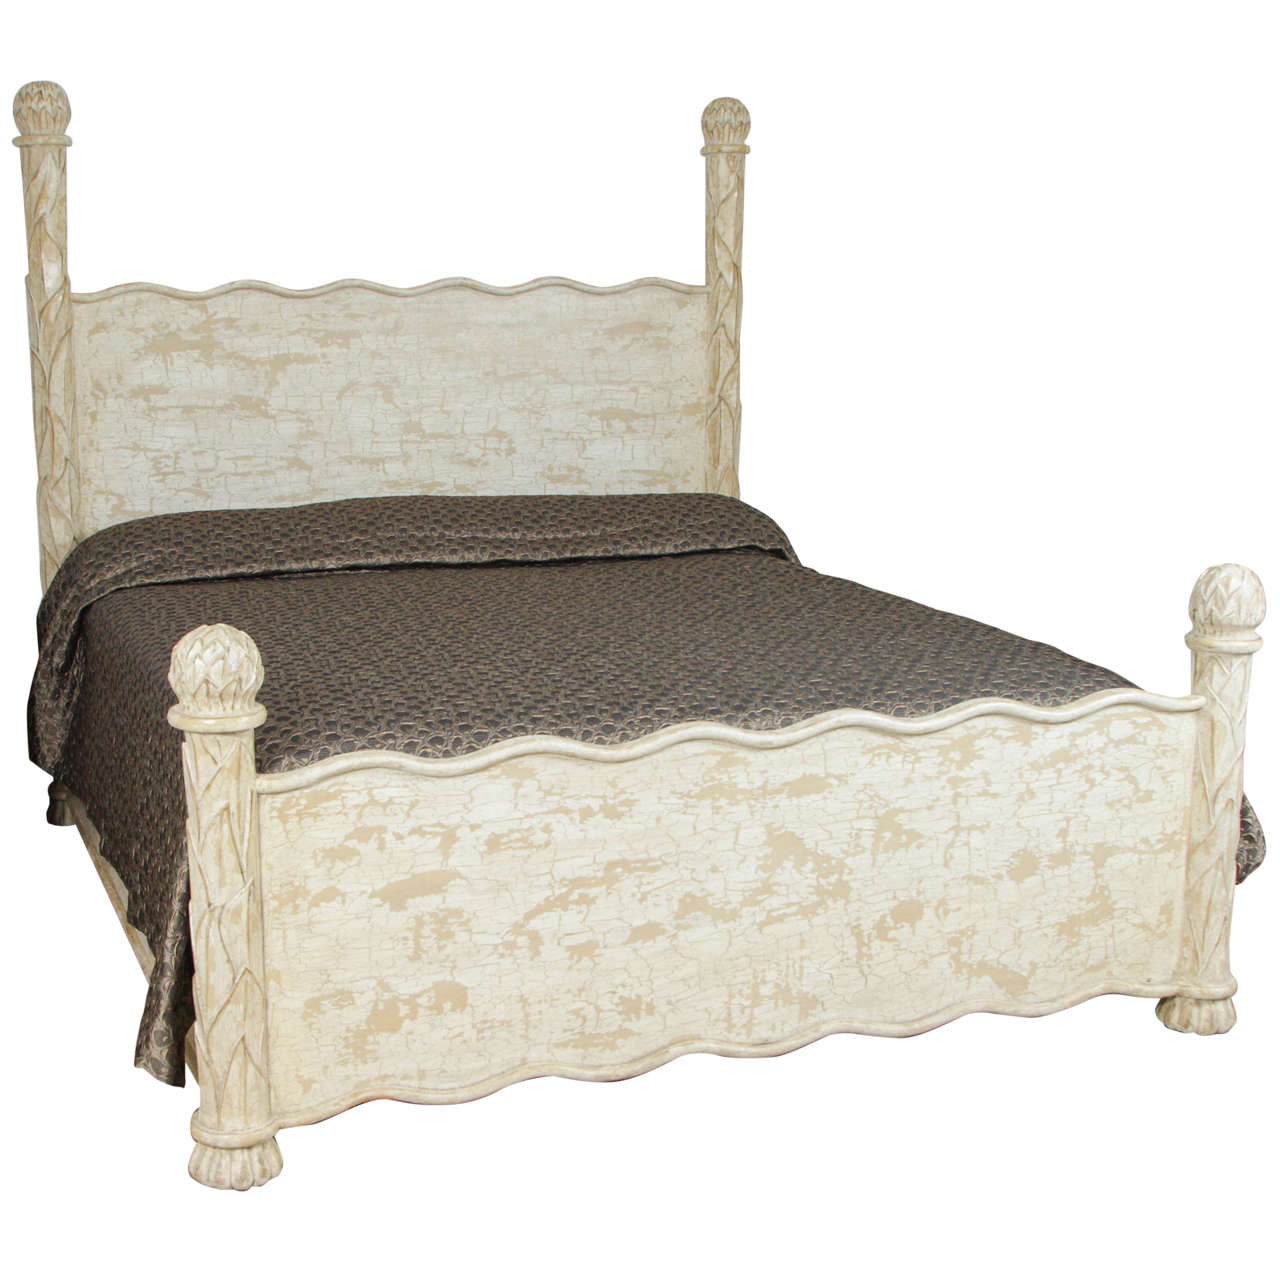 Carved Wood Bed Frame, with Artichoke Finials